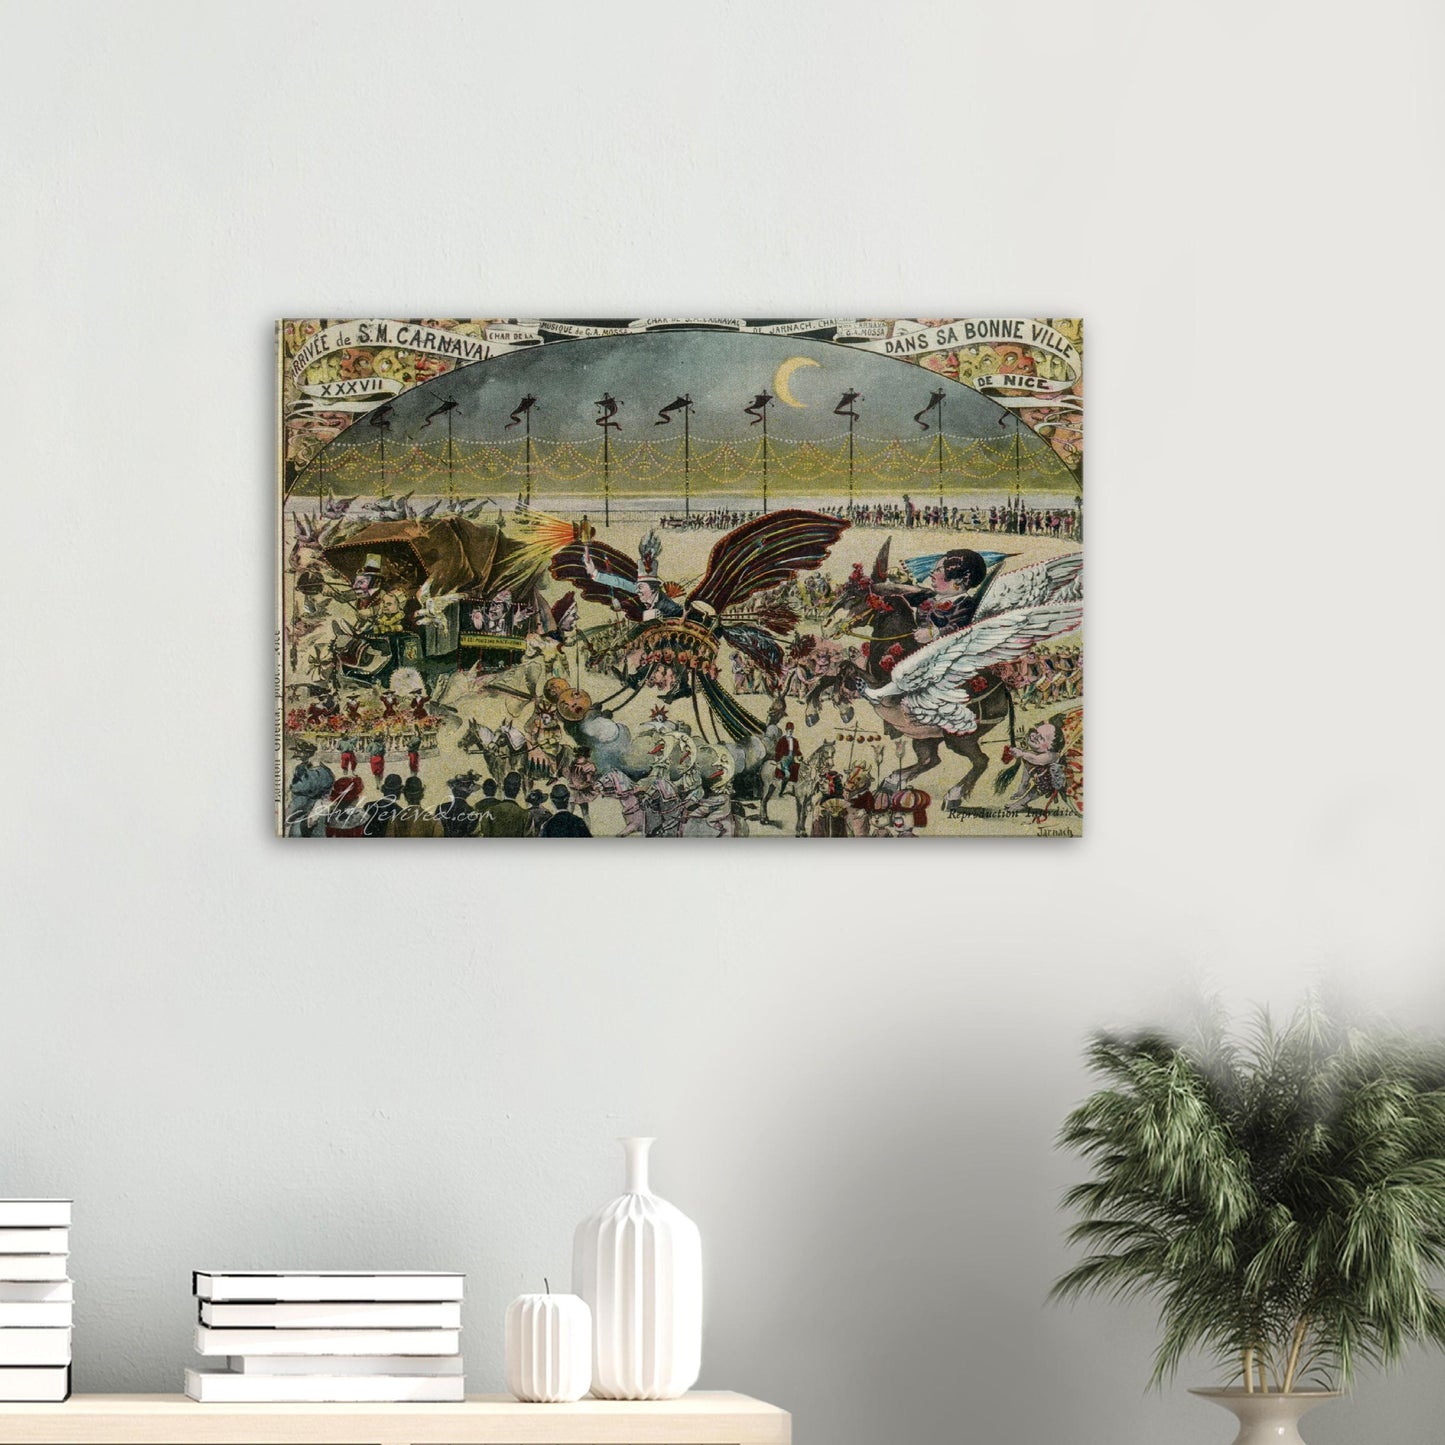 Vintage Wall Art Canvas - 37th Carnaval (Mailed 02-23-1909)